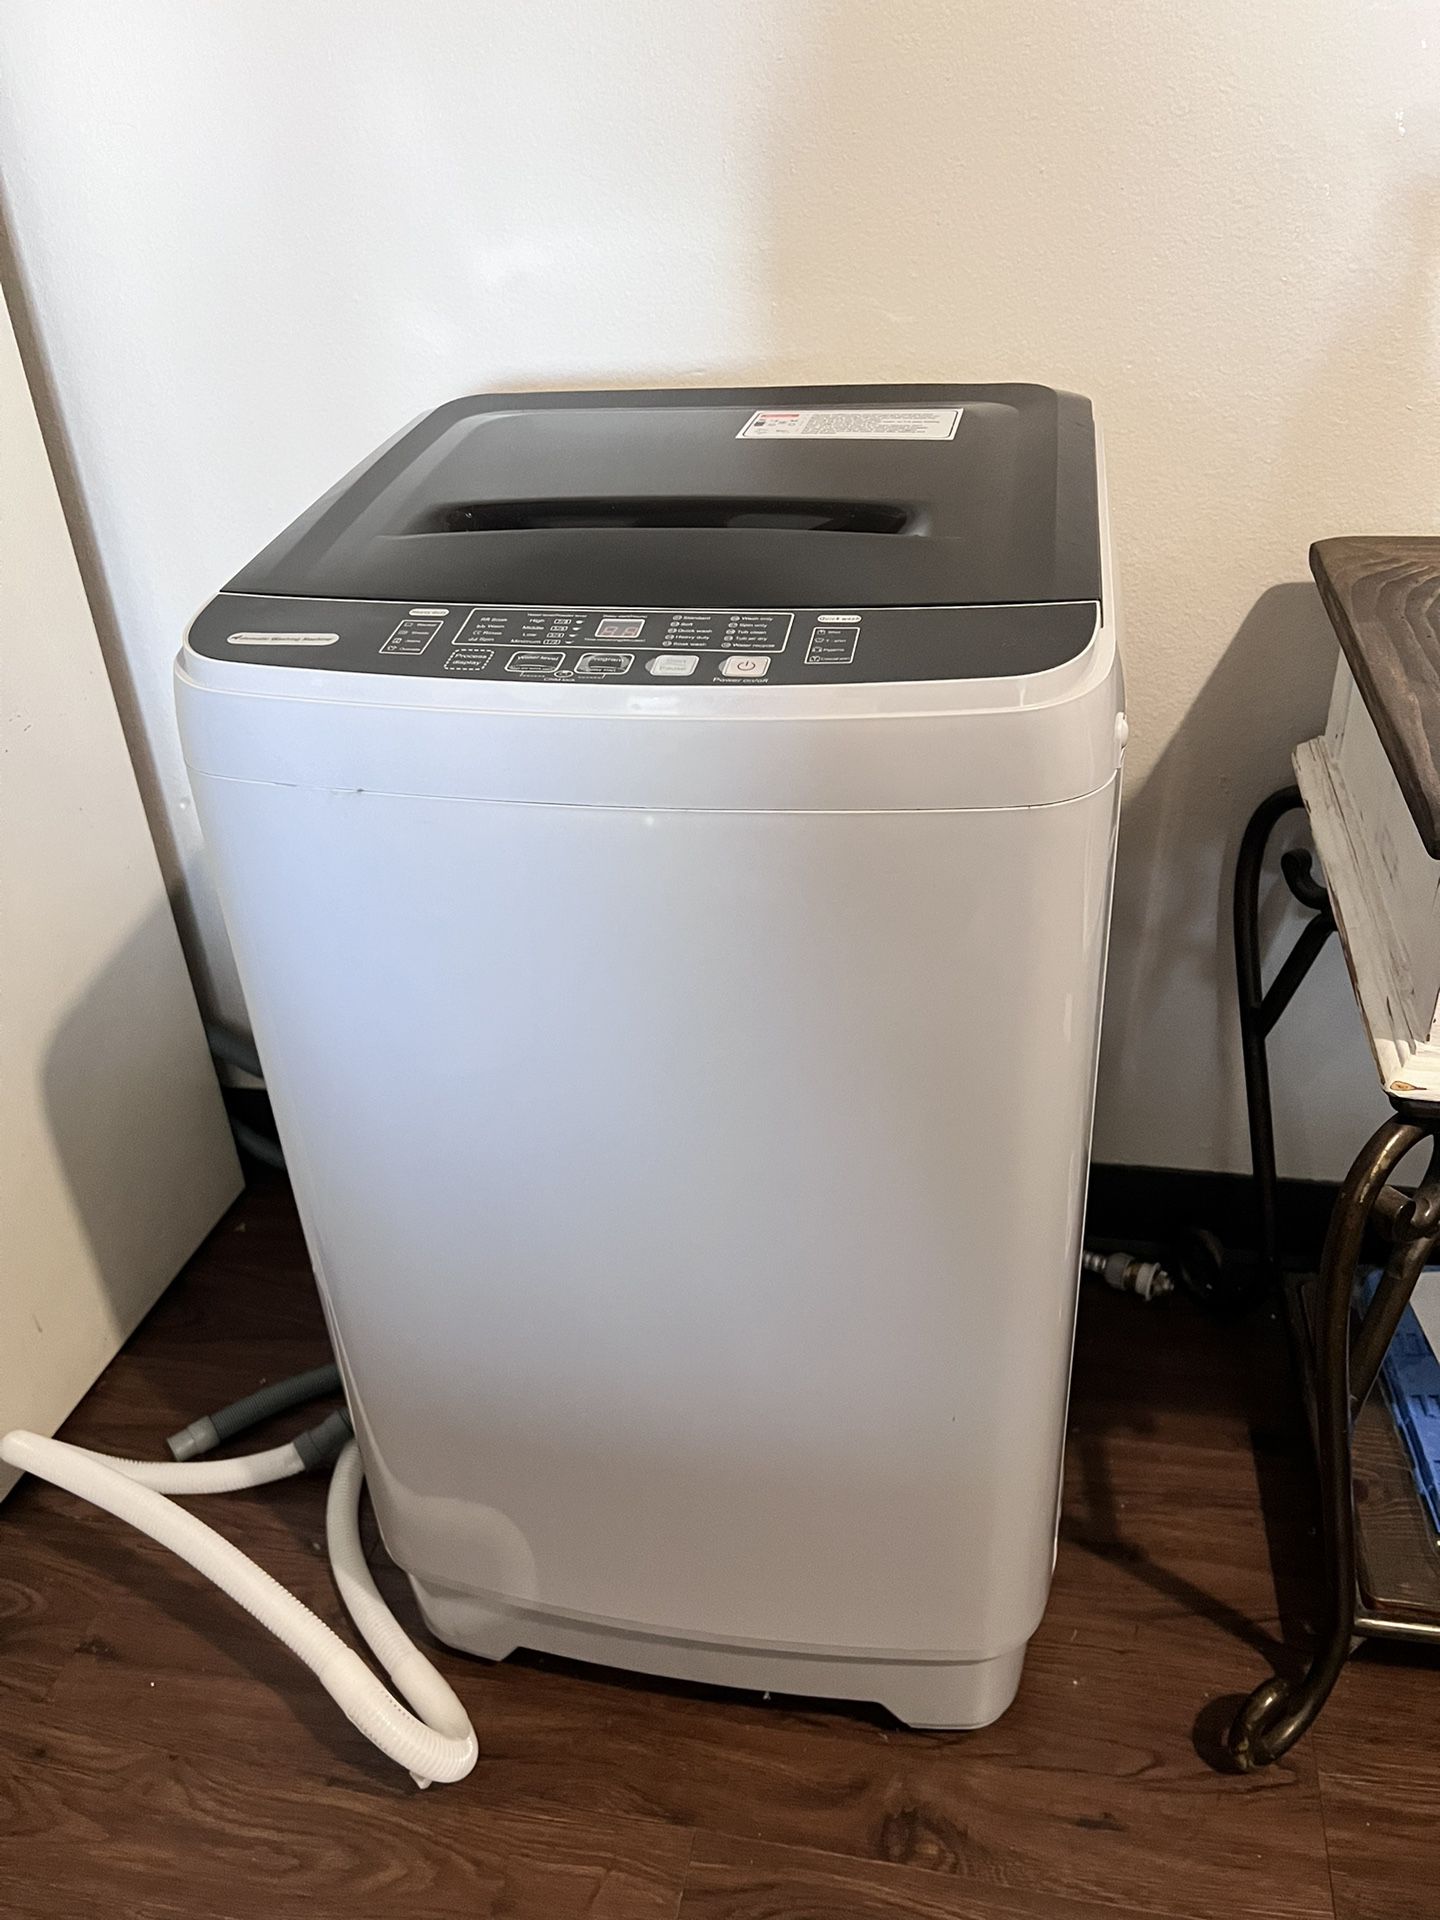 Portable Washer And Dryer - Brand New 